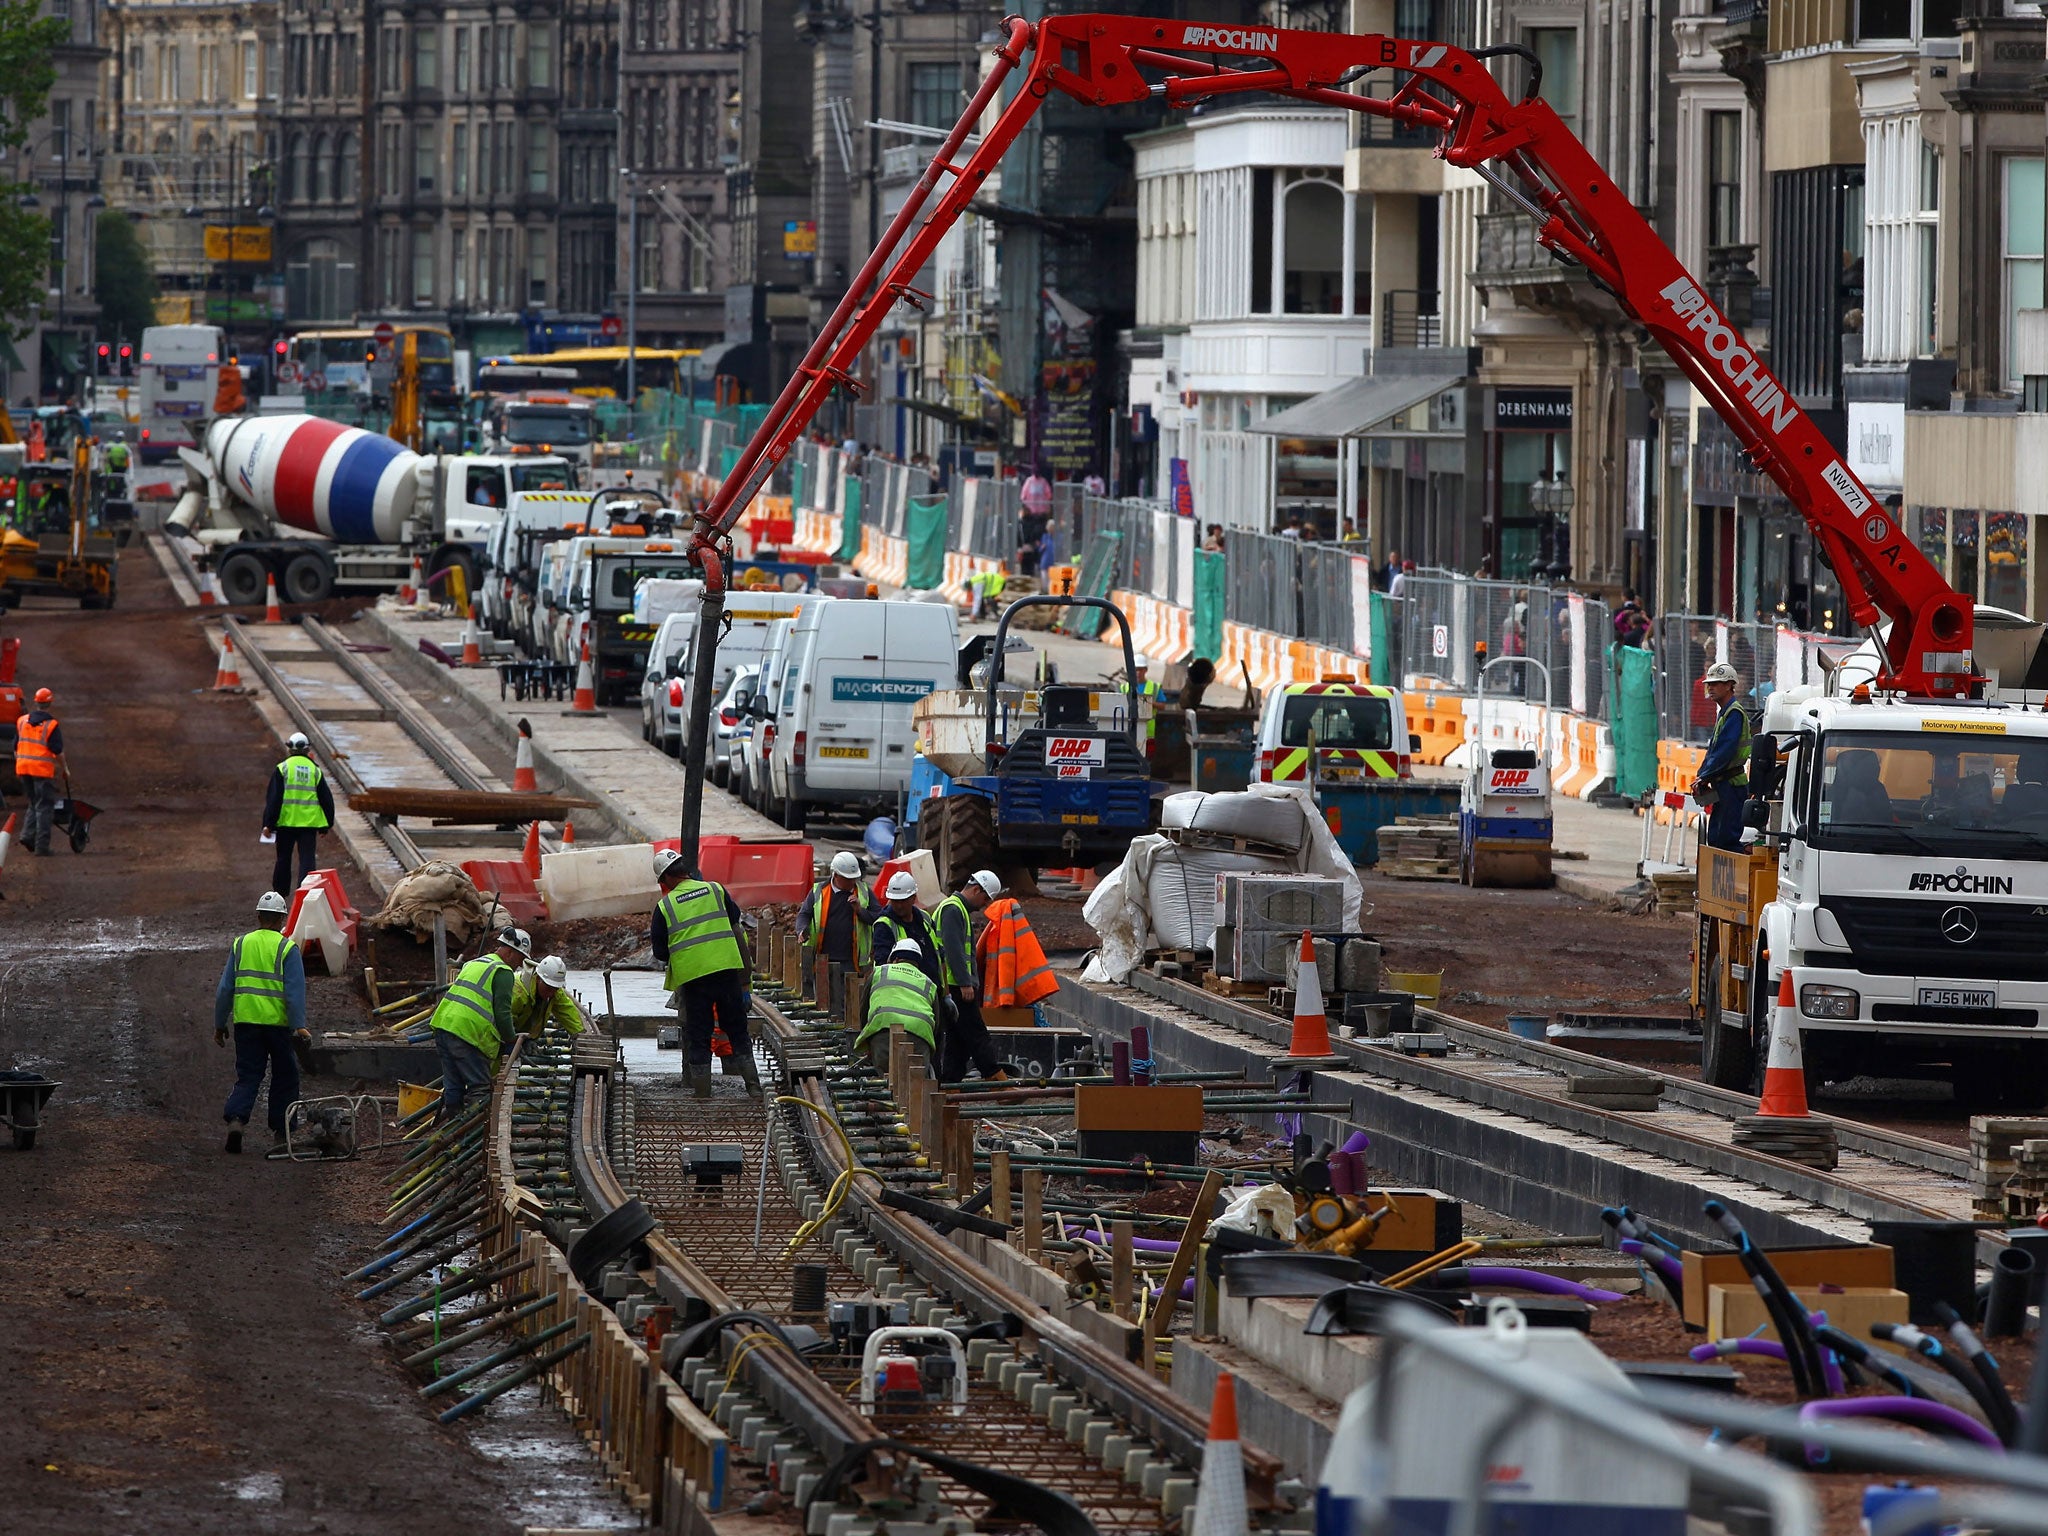 Construction of the tramway caused a seemingly never ending stream of roadworks